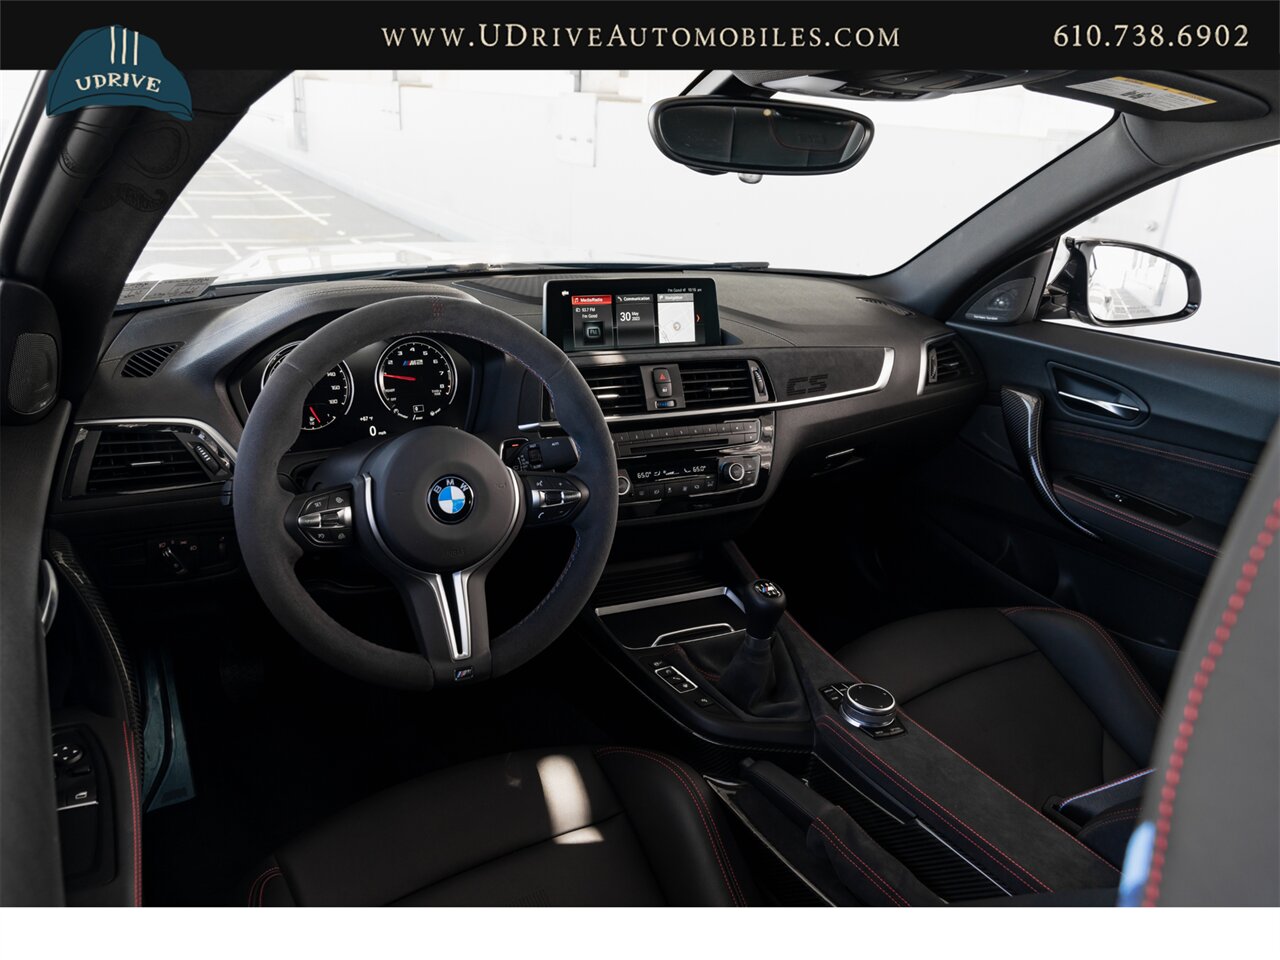 2020 BMW M2 CS  M2 CS 6 Speed Manual 2k Miles Full Body PPF Factory Warranty until 2025 - Photo 39 - West Chester, PA 19382